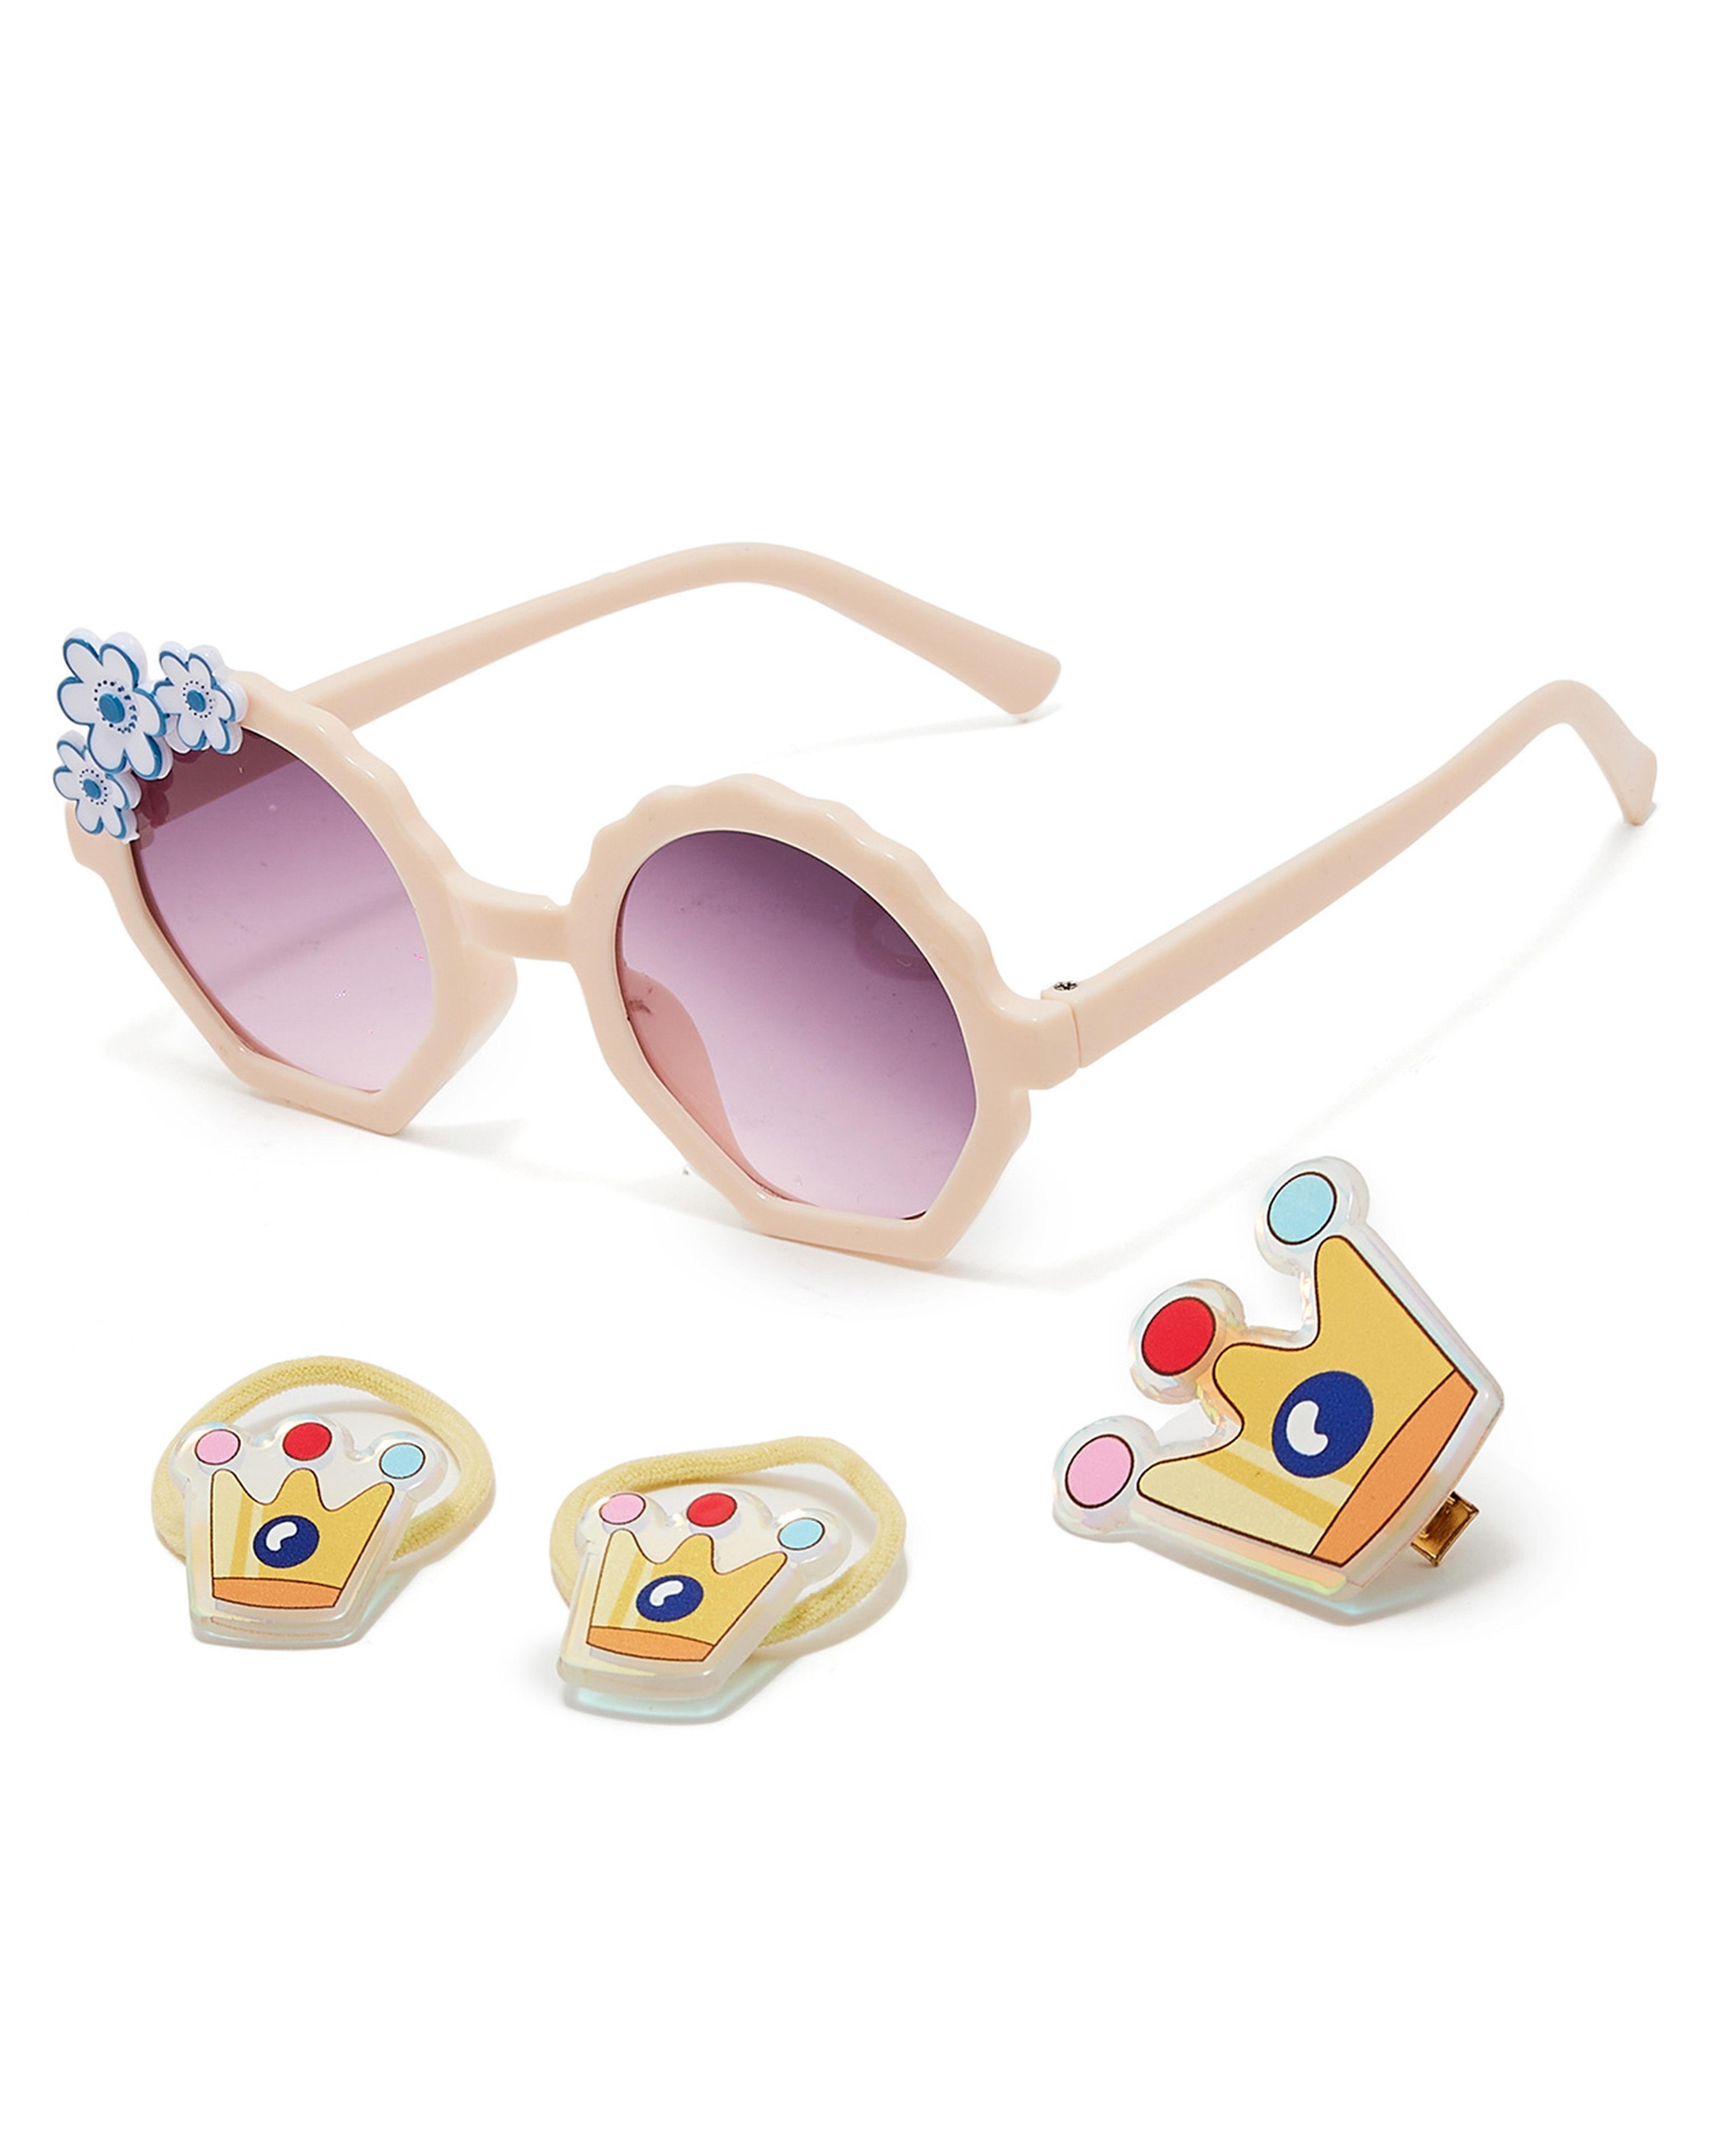 Sunglasses and Hair Accessory Set